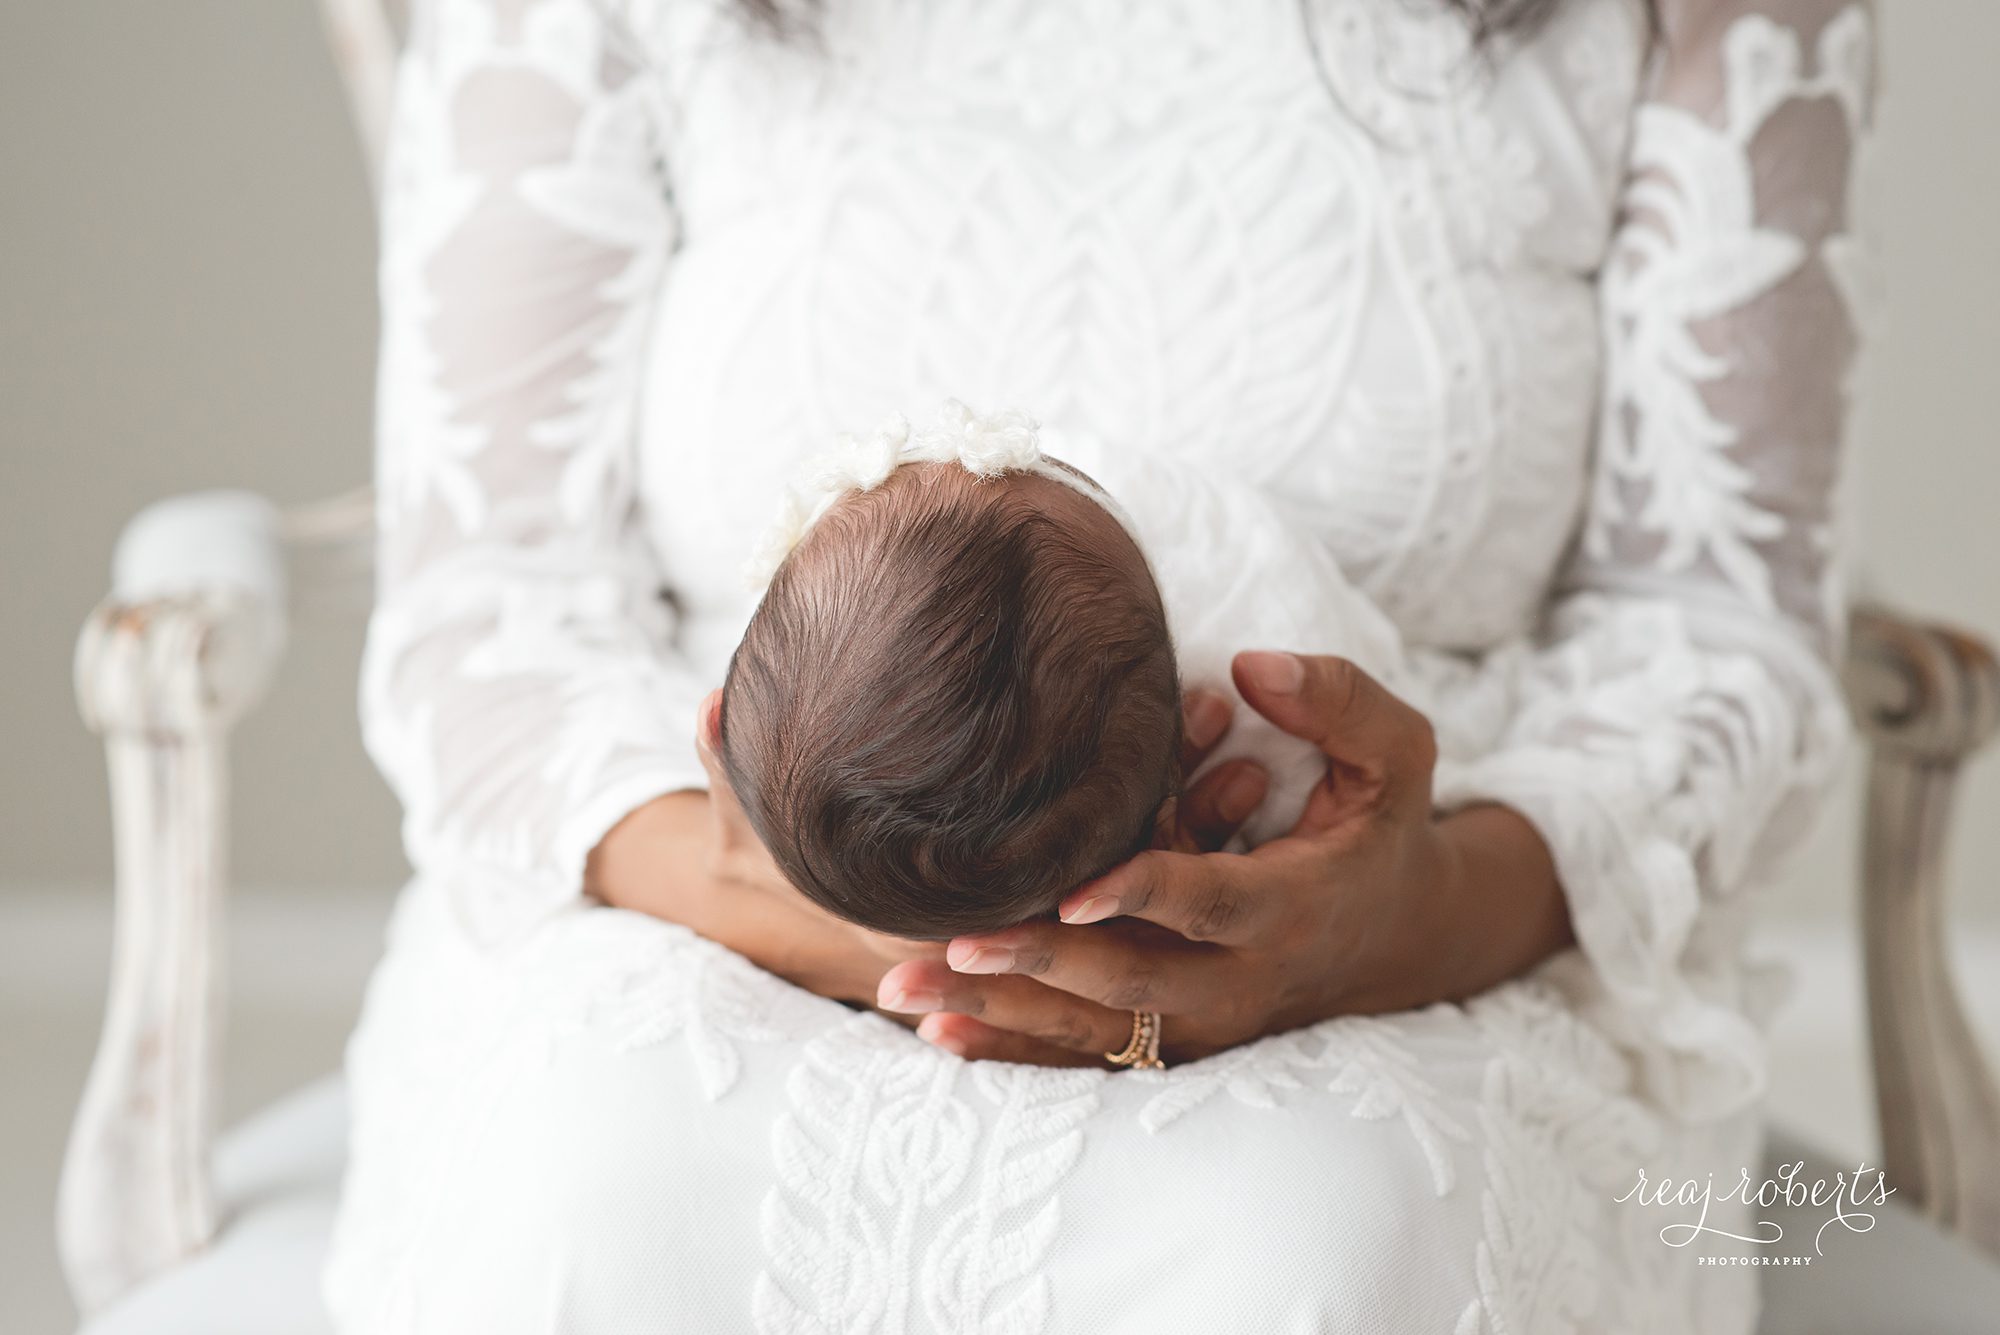 newborn baby with mother | Reaj Roberts Photography